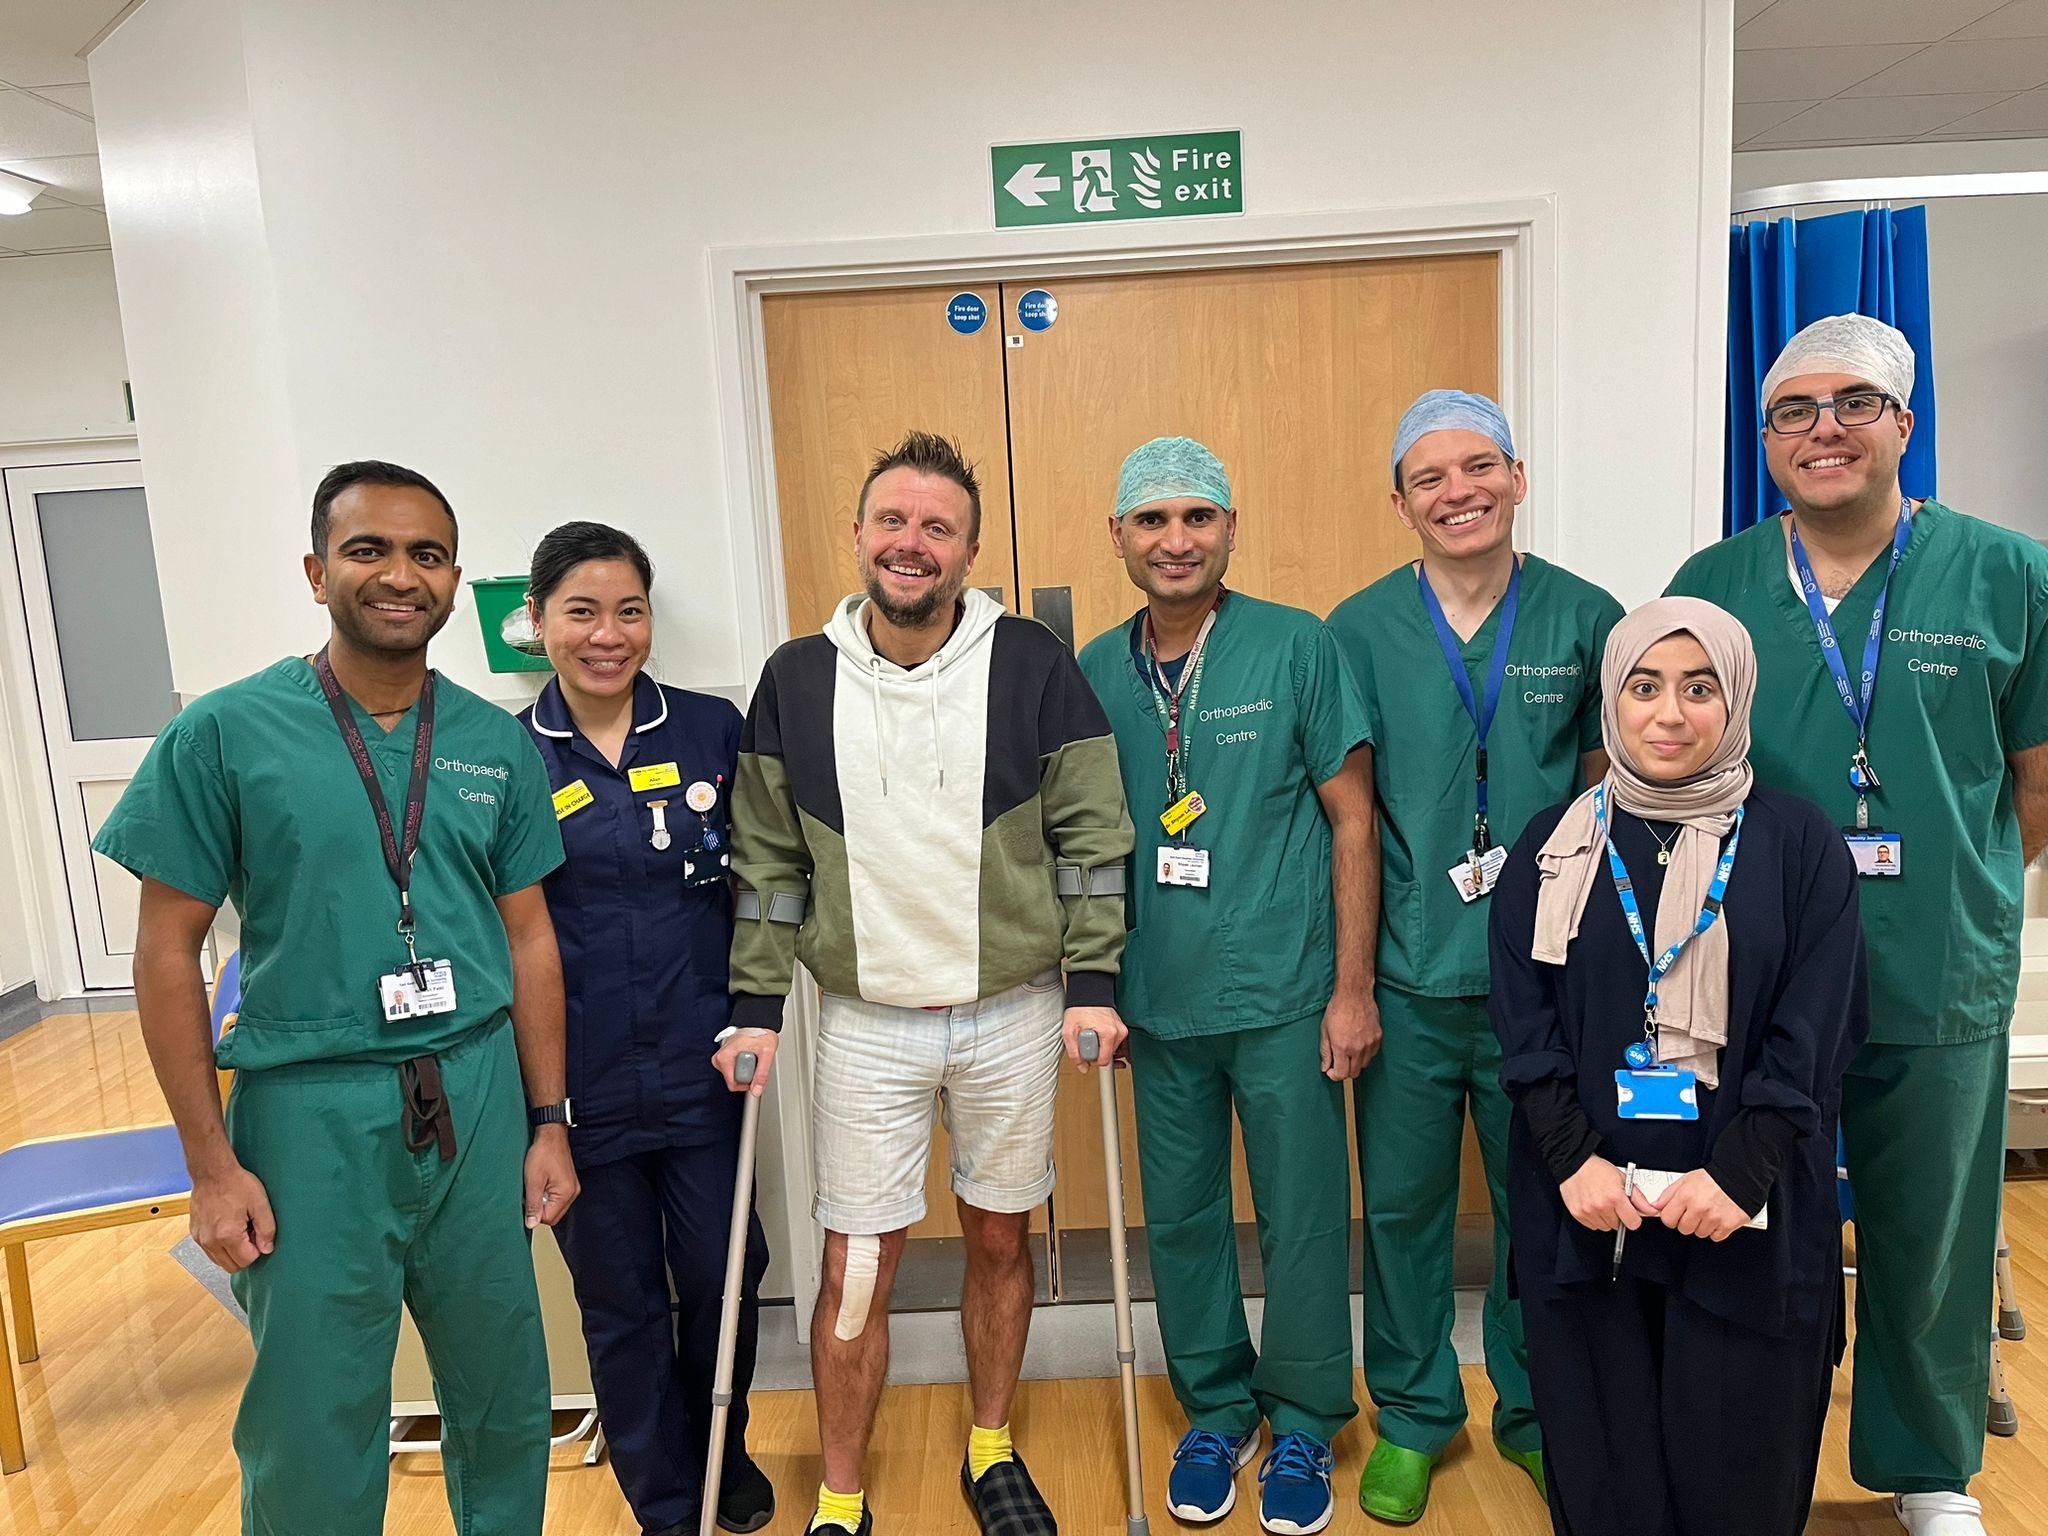 Stephen Wall with some of the team after his knee replacement operation